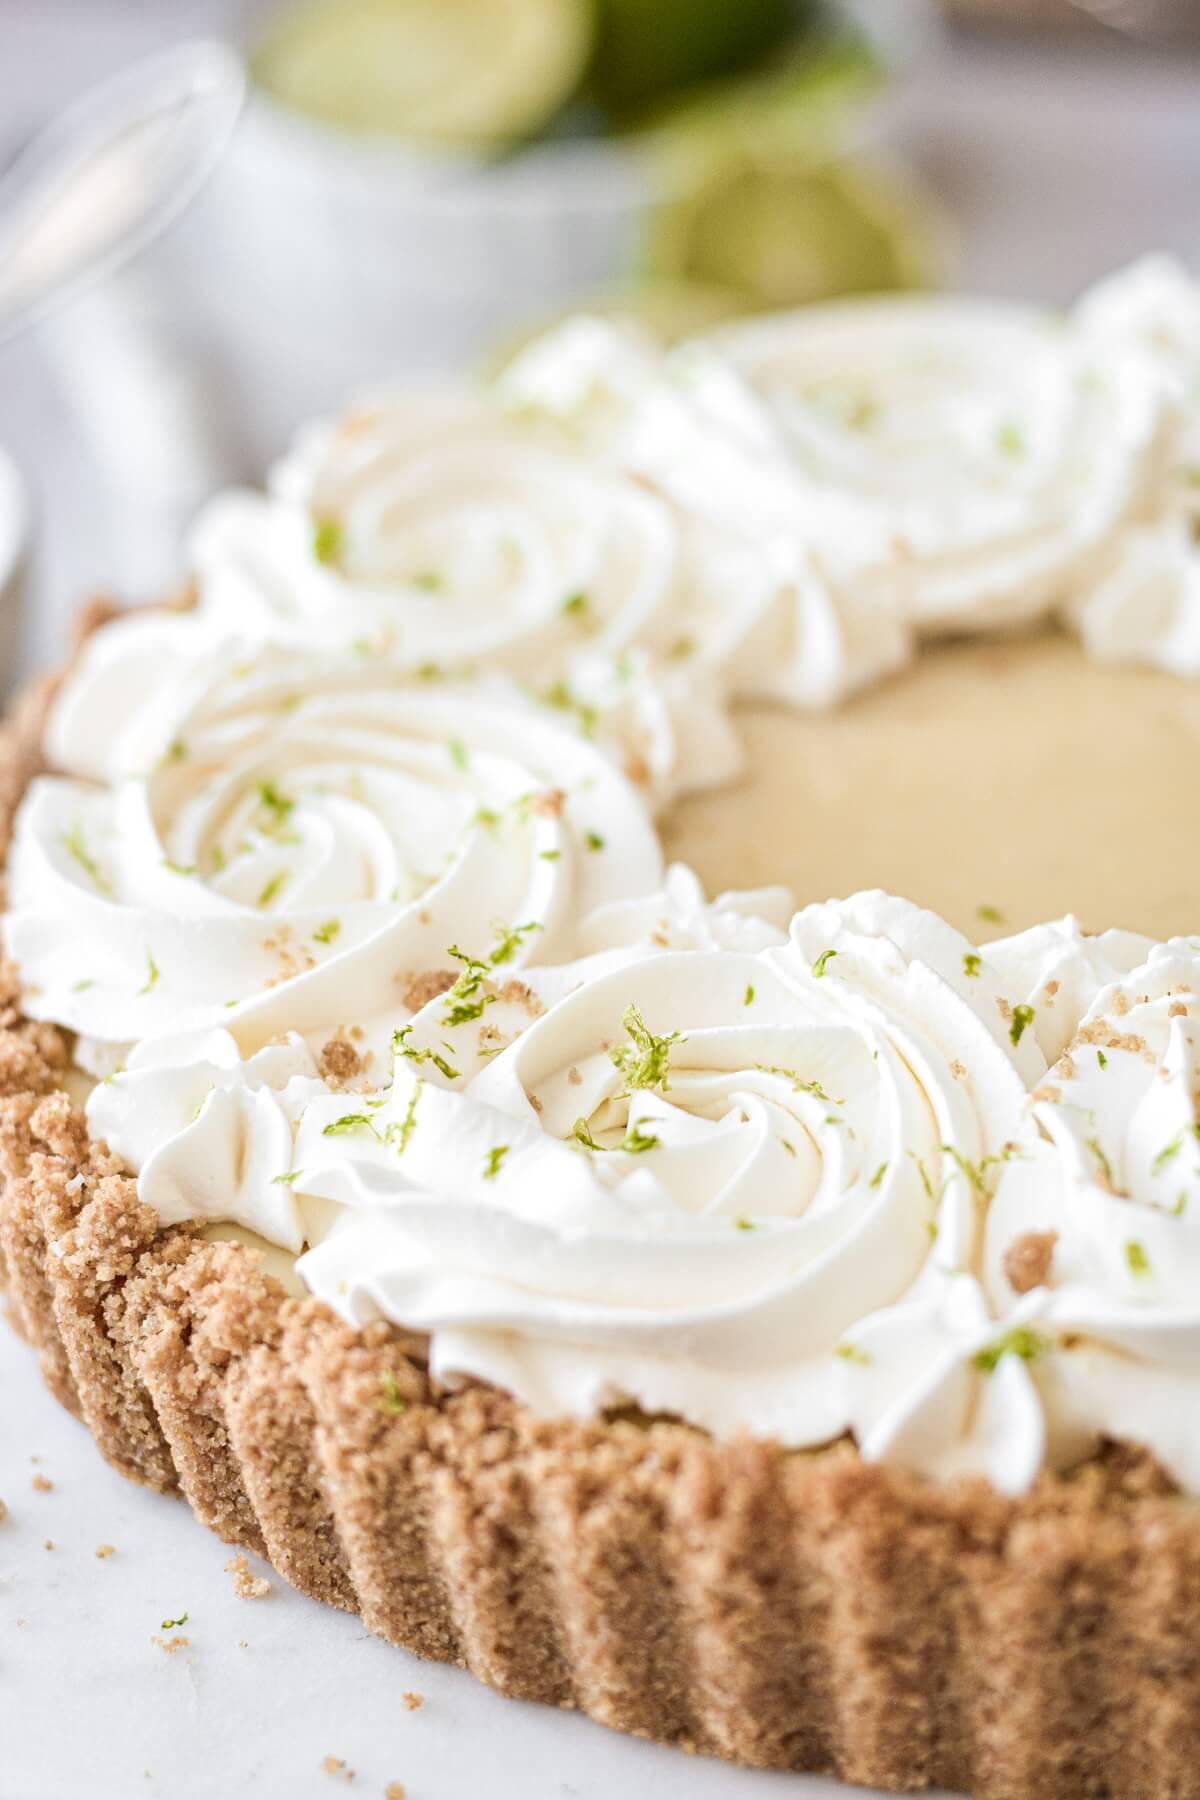 Whipped cream rosettes on top of a key lime pie.